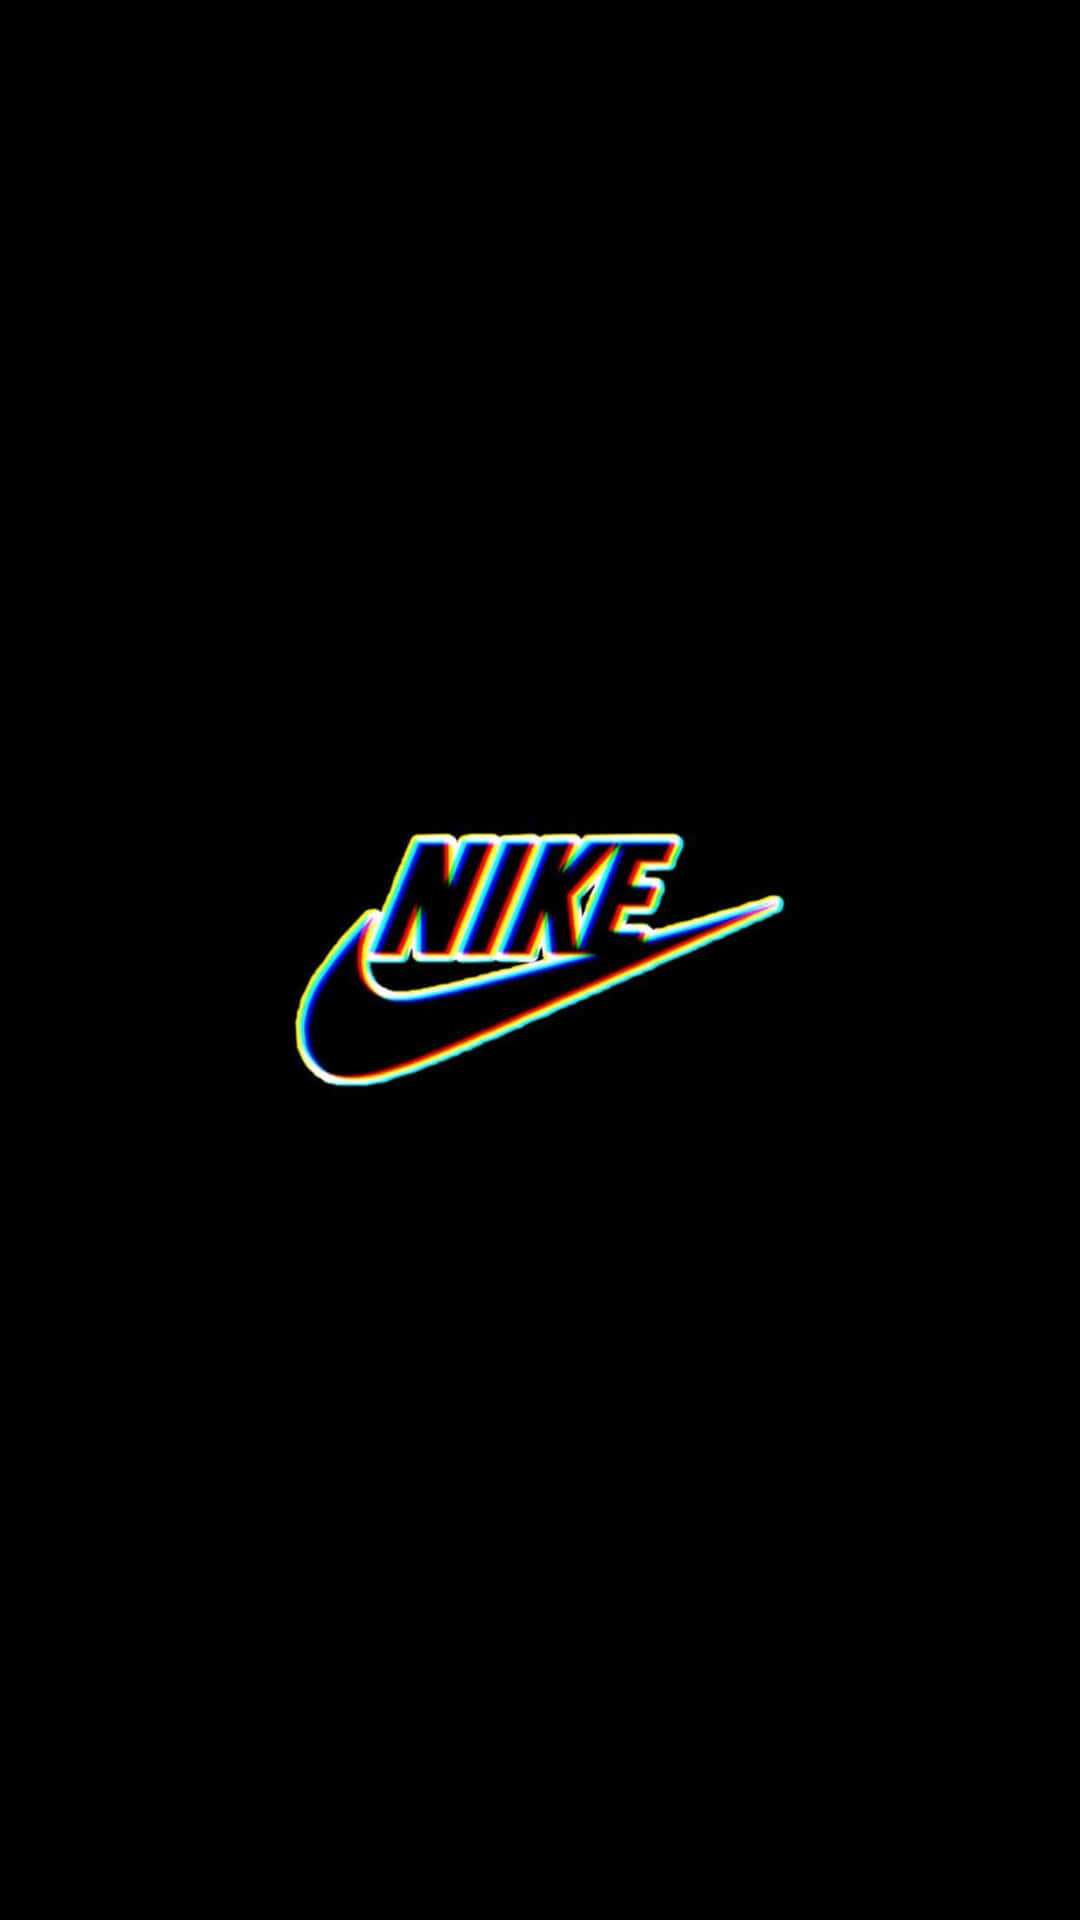 Nike wallpaper for iPhone and Android - Black glitch